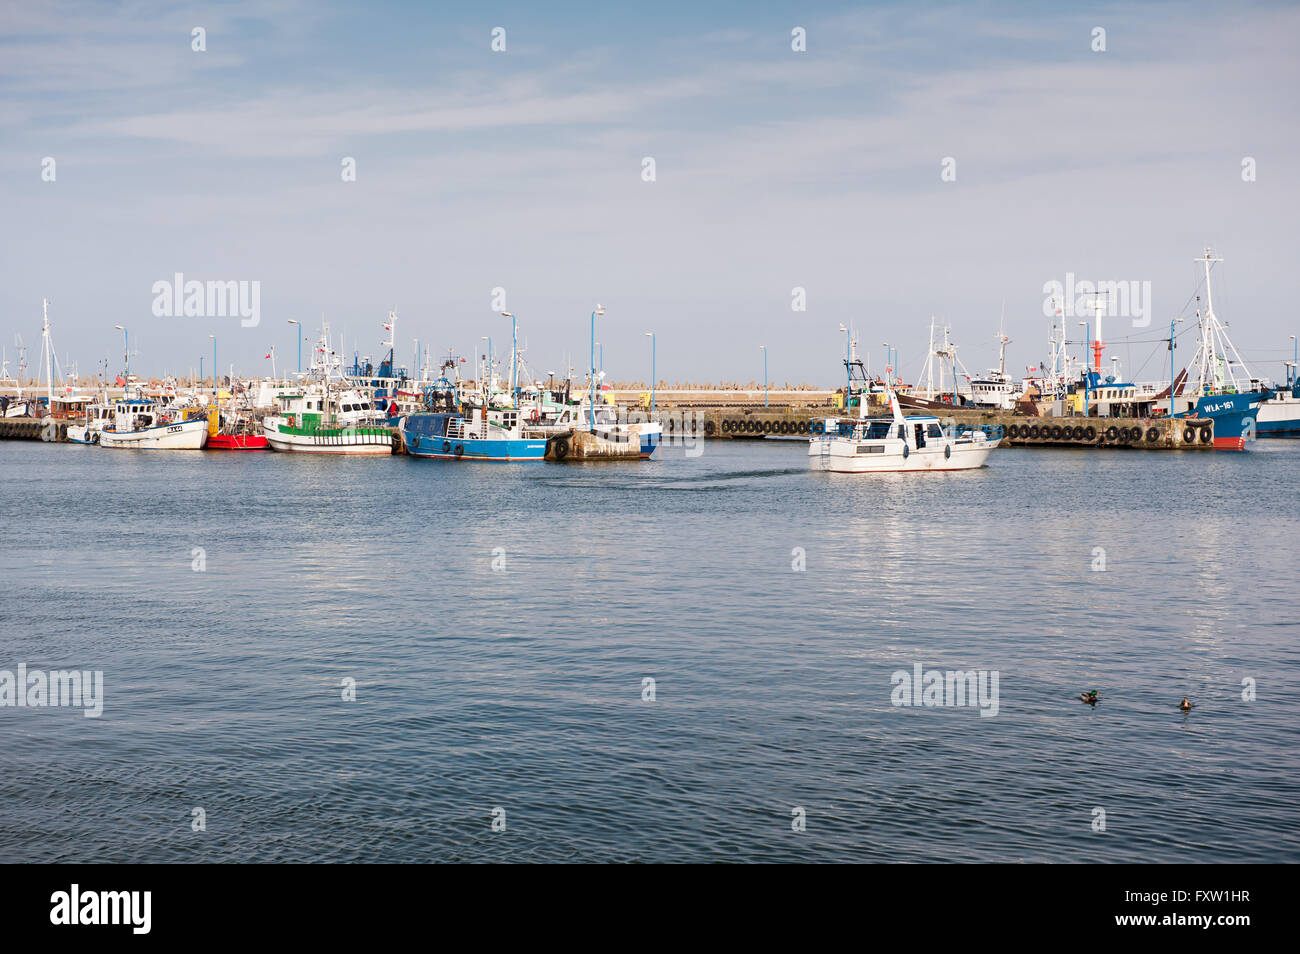 Fishing vessels on water at Szkuner harbour in Wladyslawowo, Poland, Europe. Moored ships in a Schooner fishing docks. Stock Photo